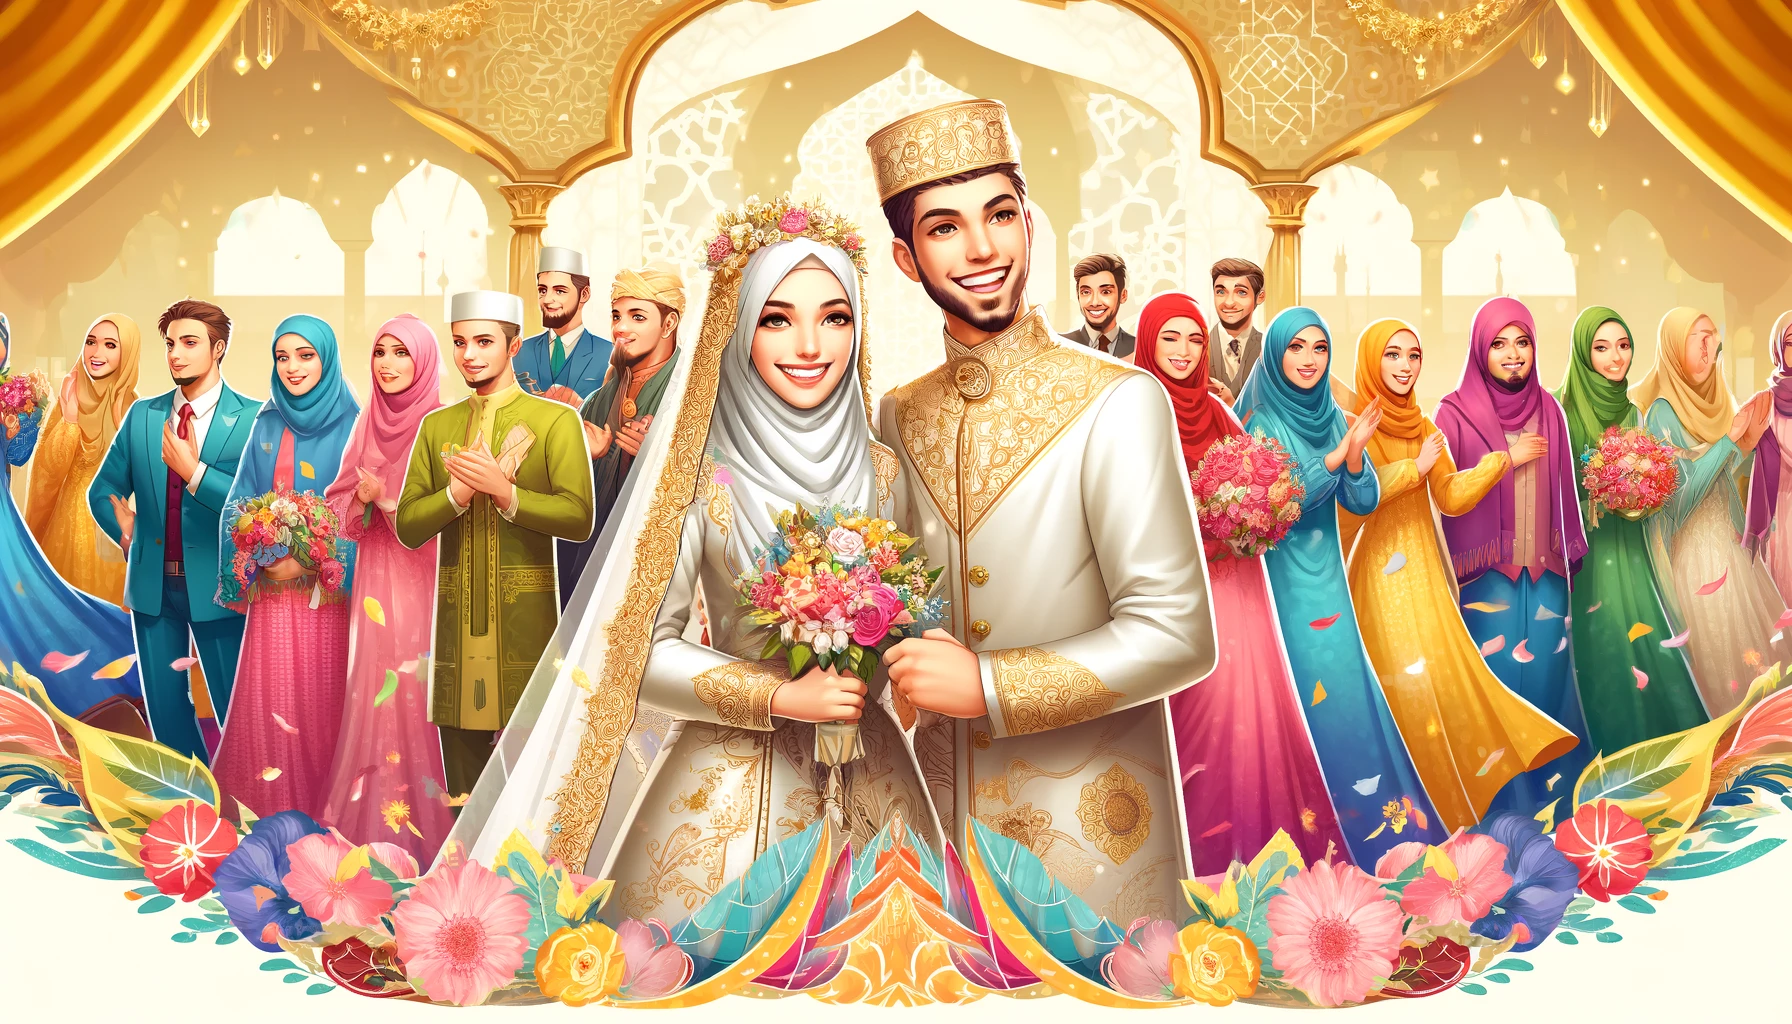 The image captures the newly married couple in traditional attire, surrounded by their happy family and friends. The background includes elegant Islamic patterns and floral arrangements